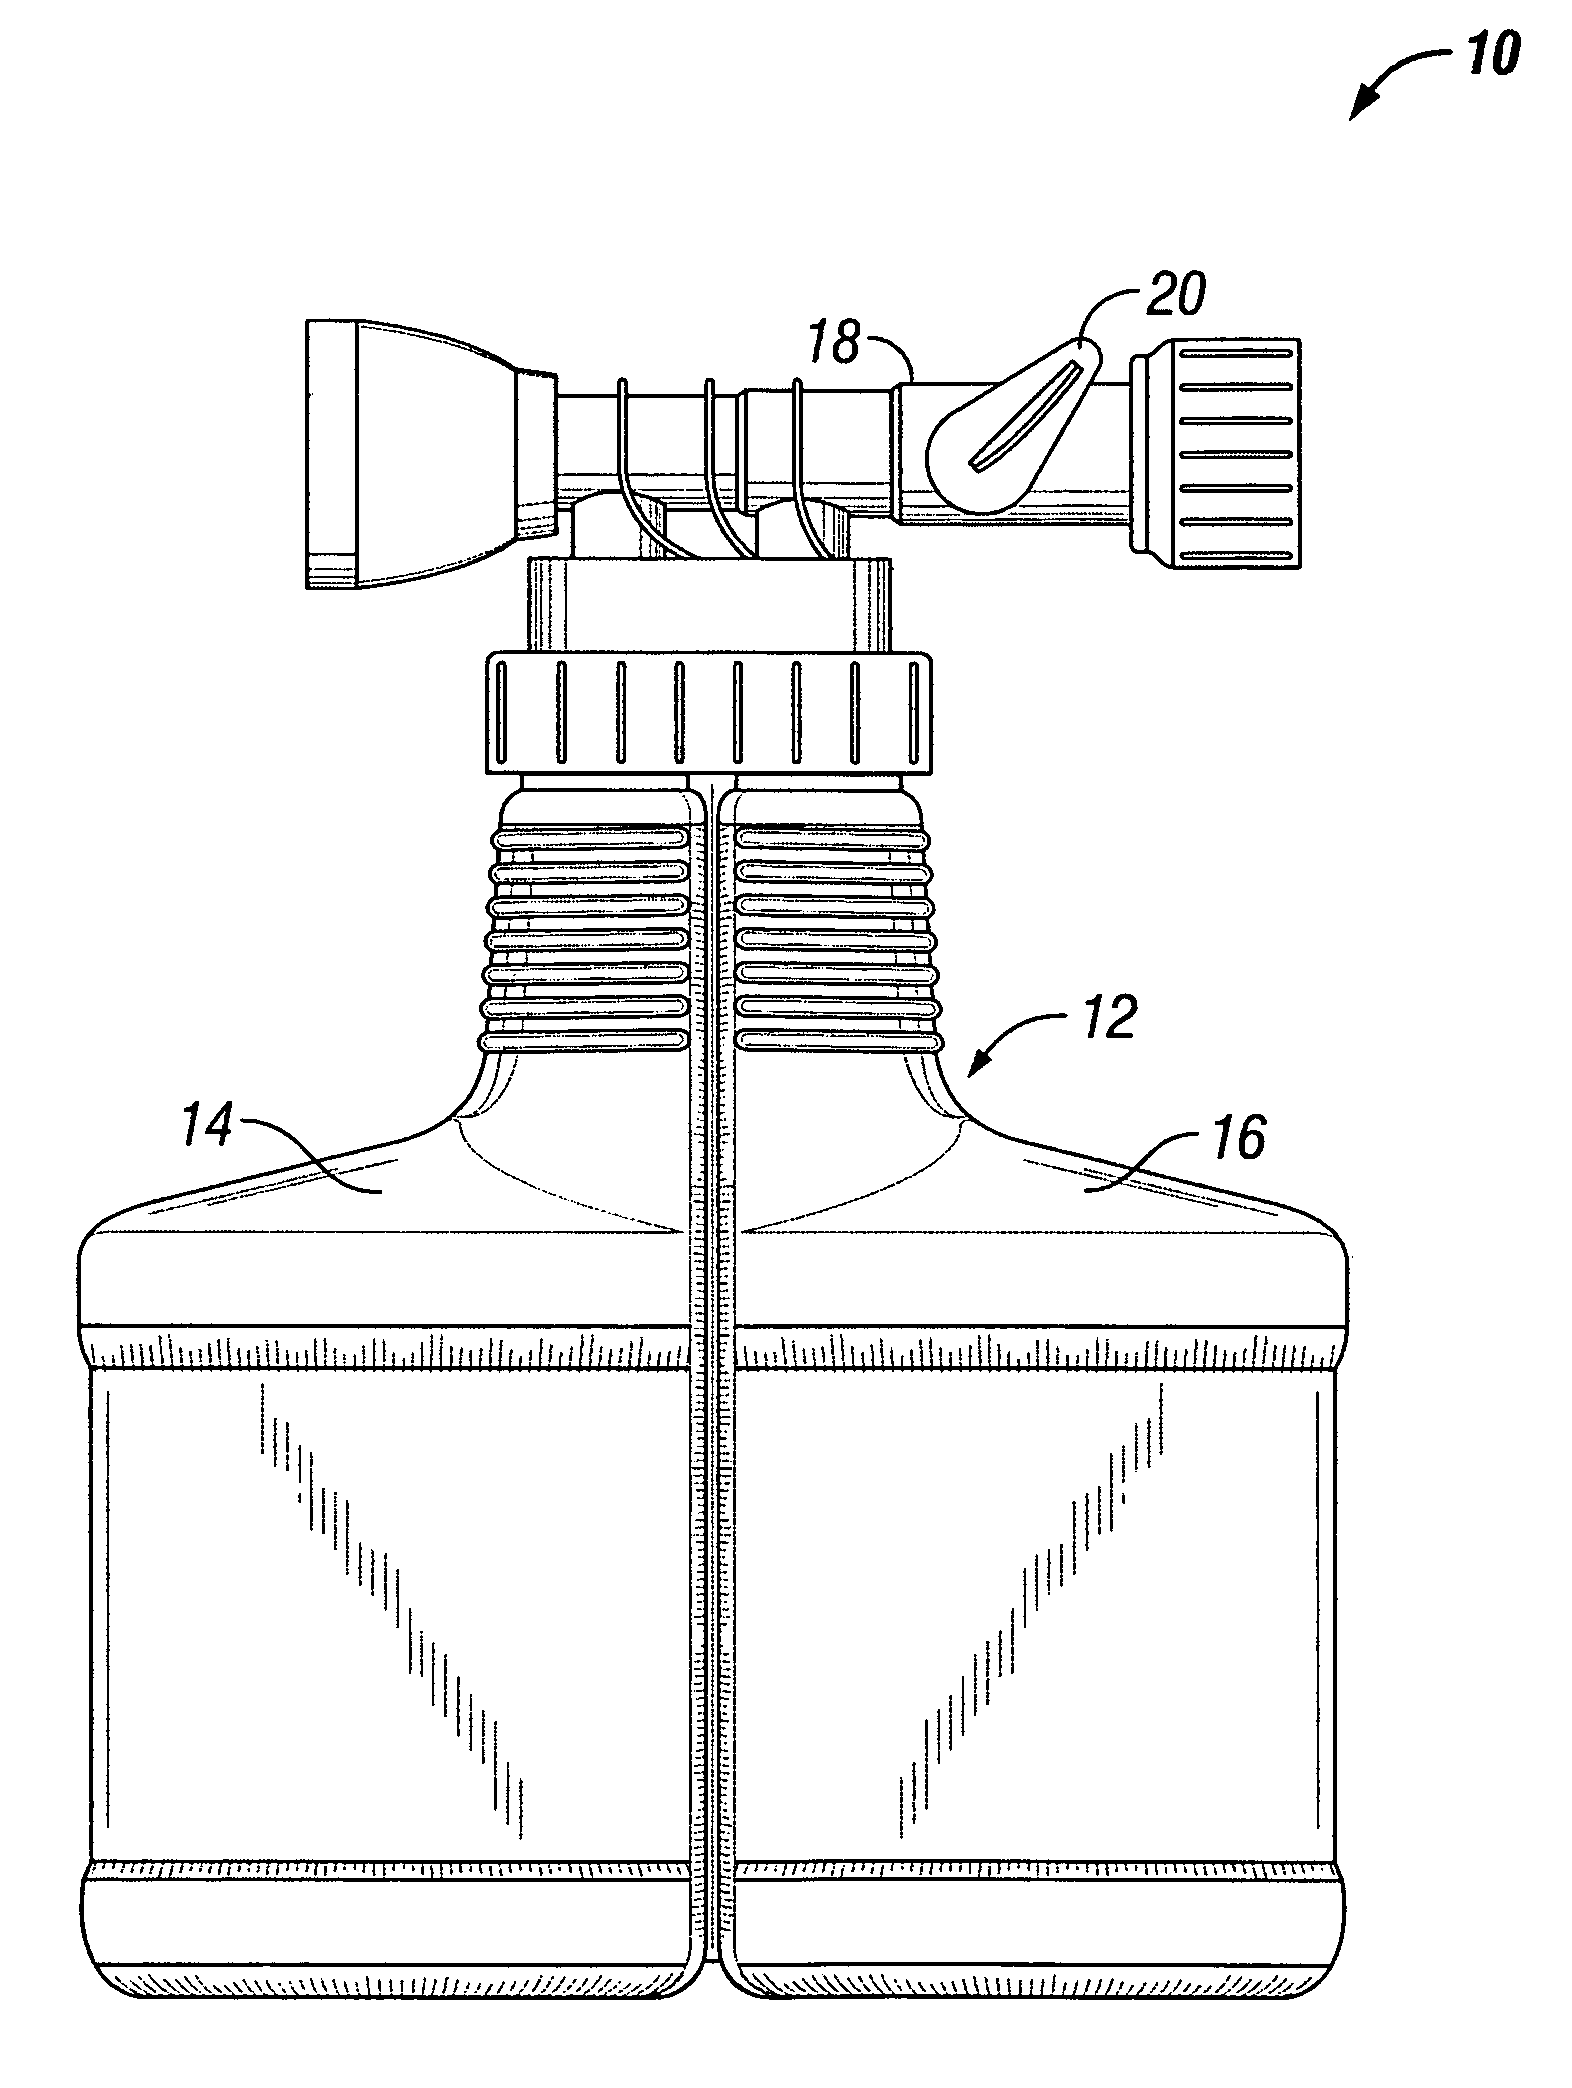 System and method for cleaning and/or treating surfaces of objects